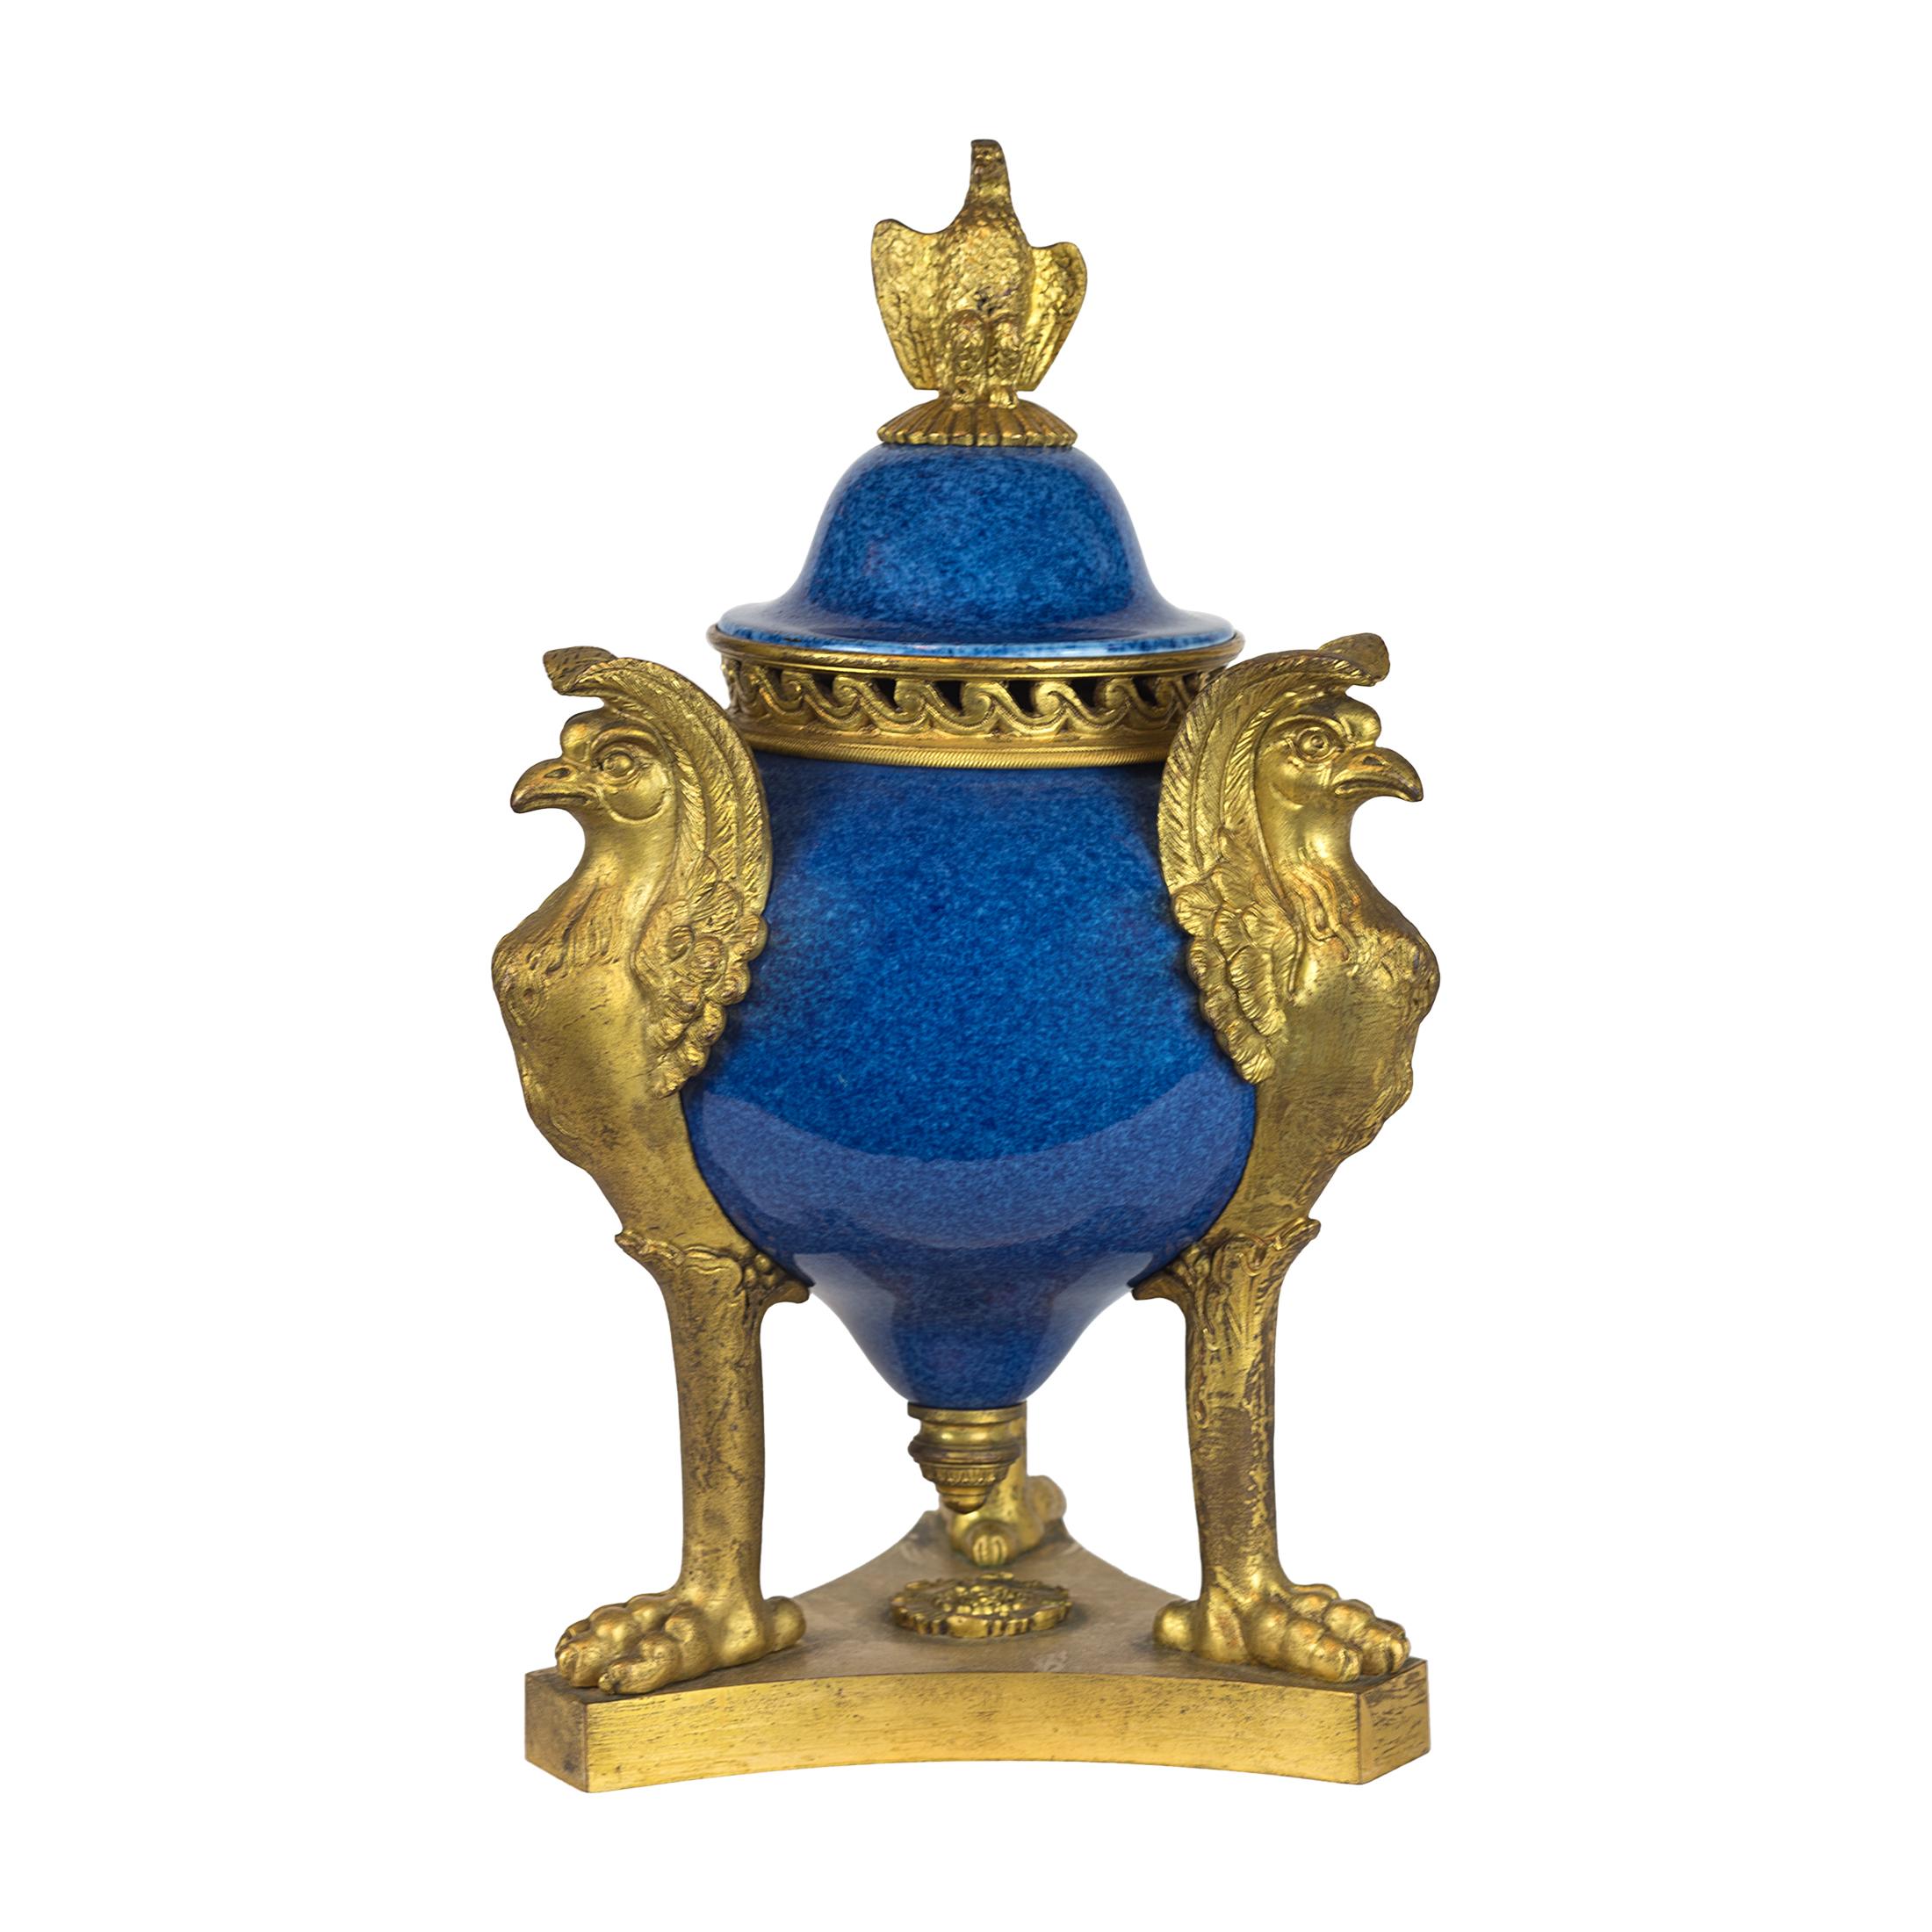 Pair of Blue-ground porcelain potpourri / incense vases with eagle finials and griffin supports. Removable lid and band of bronze at the neck of the vase with cut outs allows one to place potpourri or other perfumed items into the vase to enhance